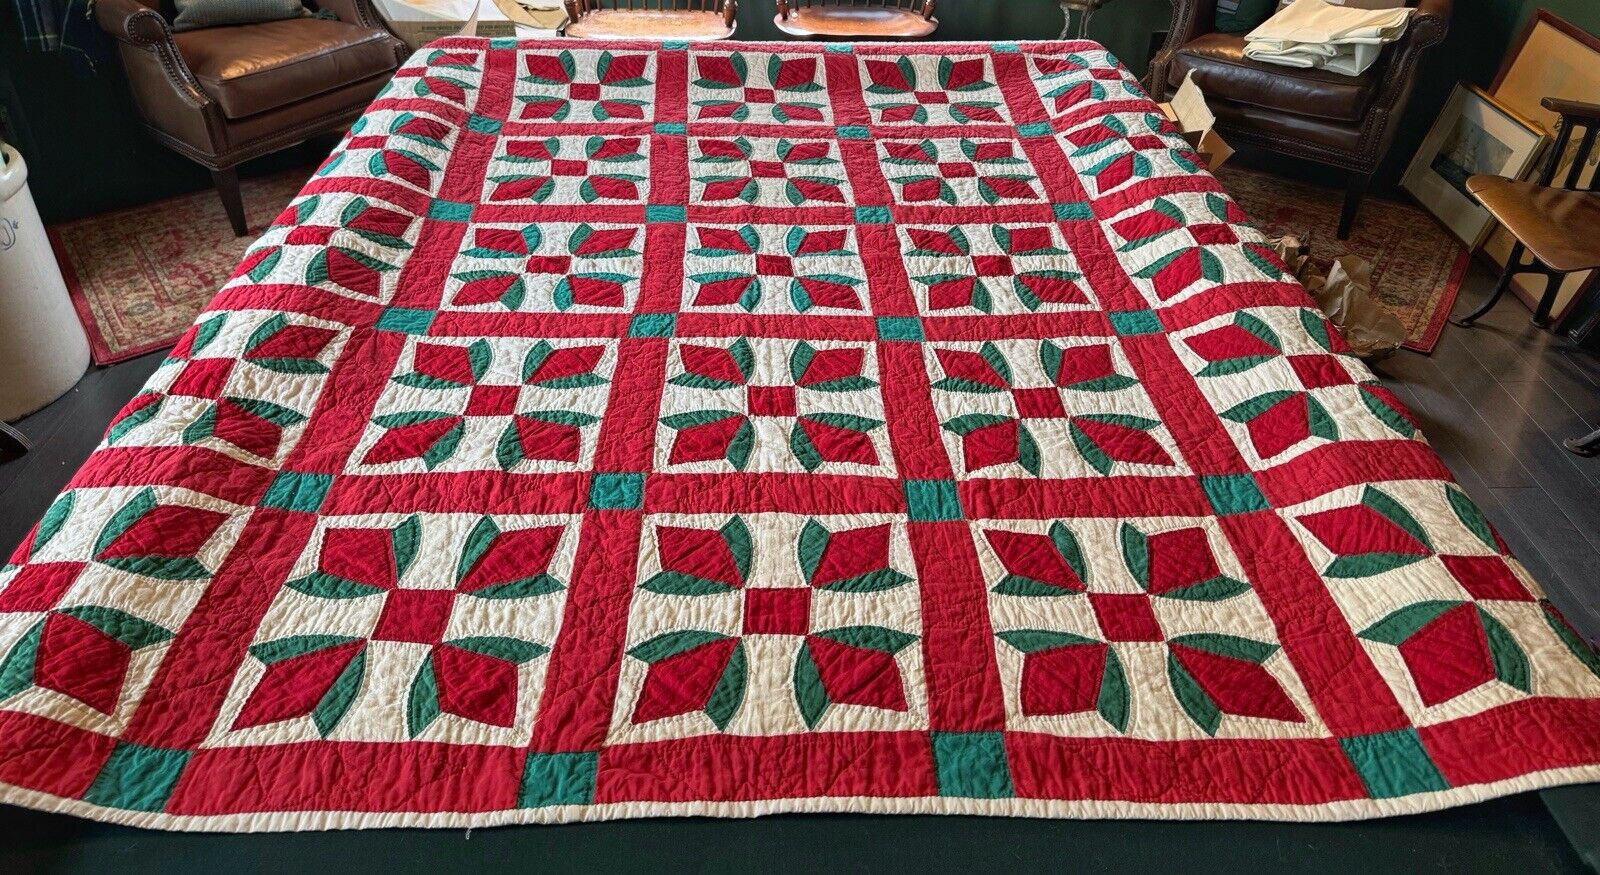 Vintage Hand Stitched Red, White, Green Tulip Flower Poinsettia Quilt 68” X 70”